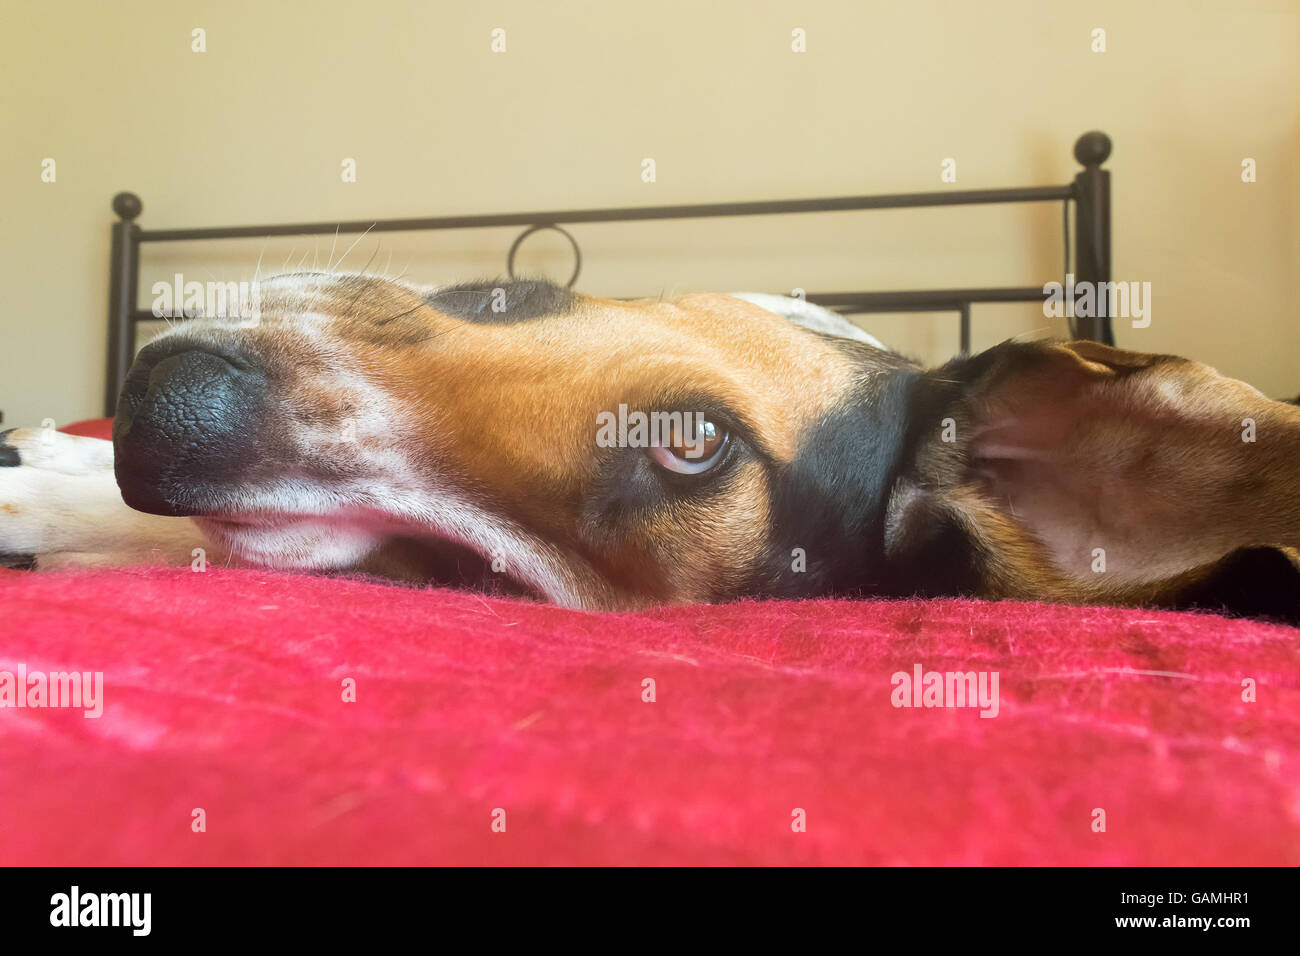 Funny pose of a dog on a bed looking backwards at the camera. Stock Photo